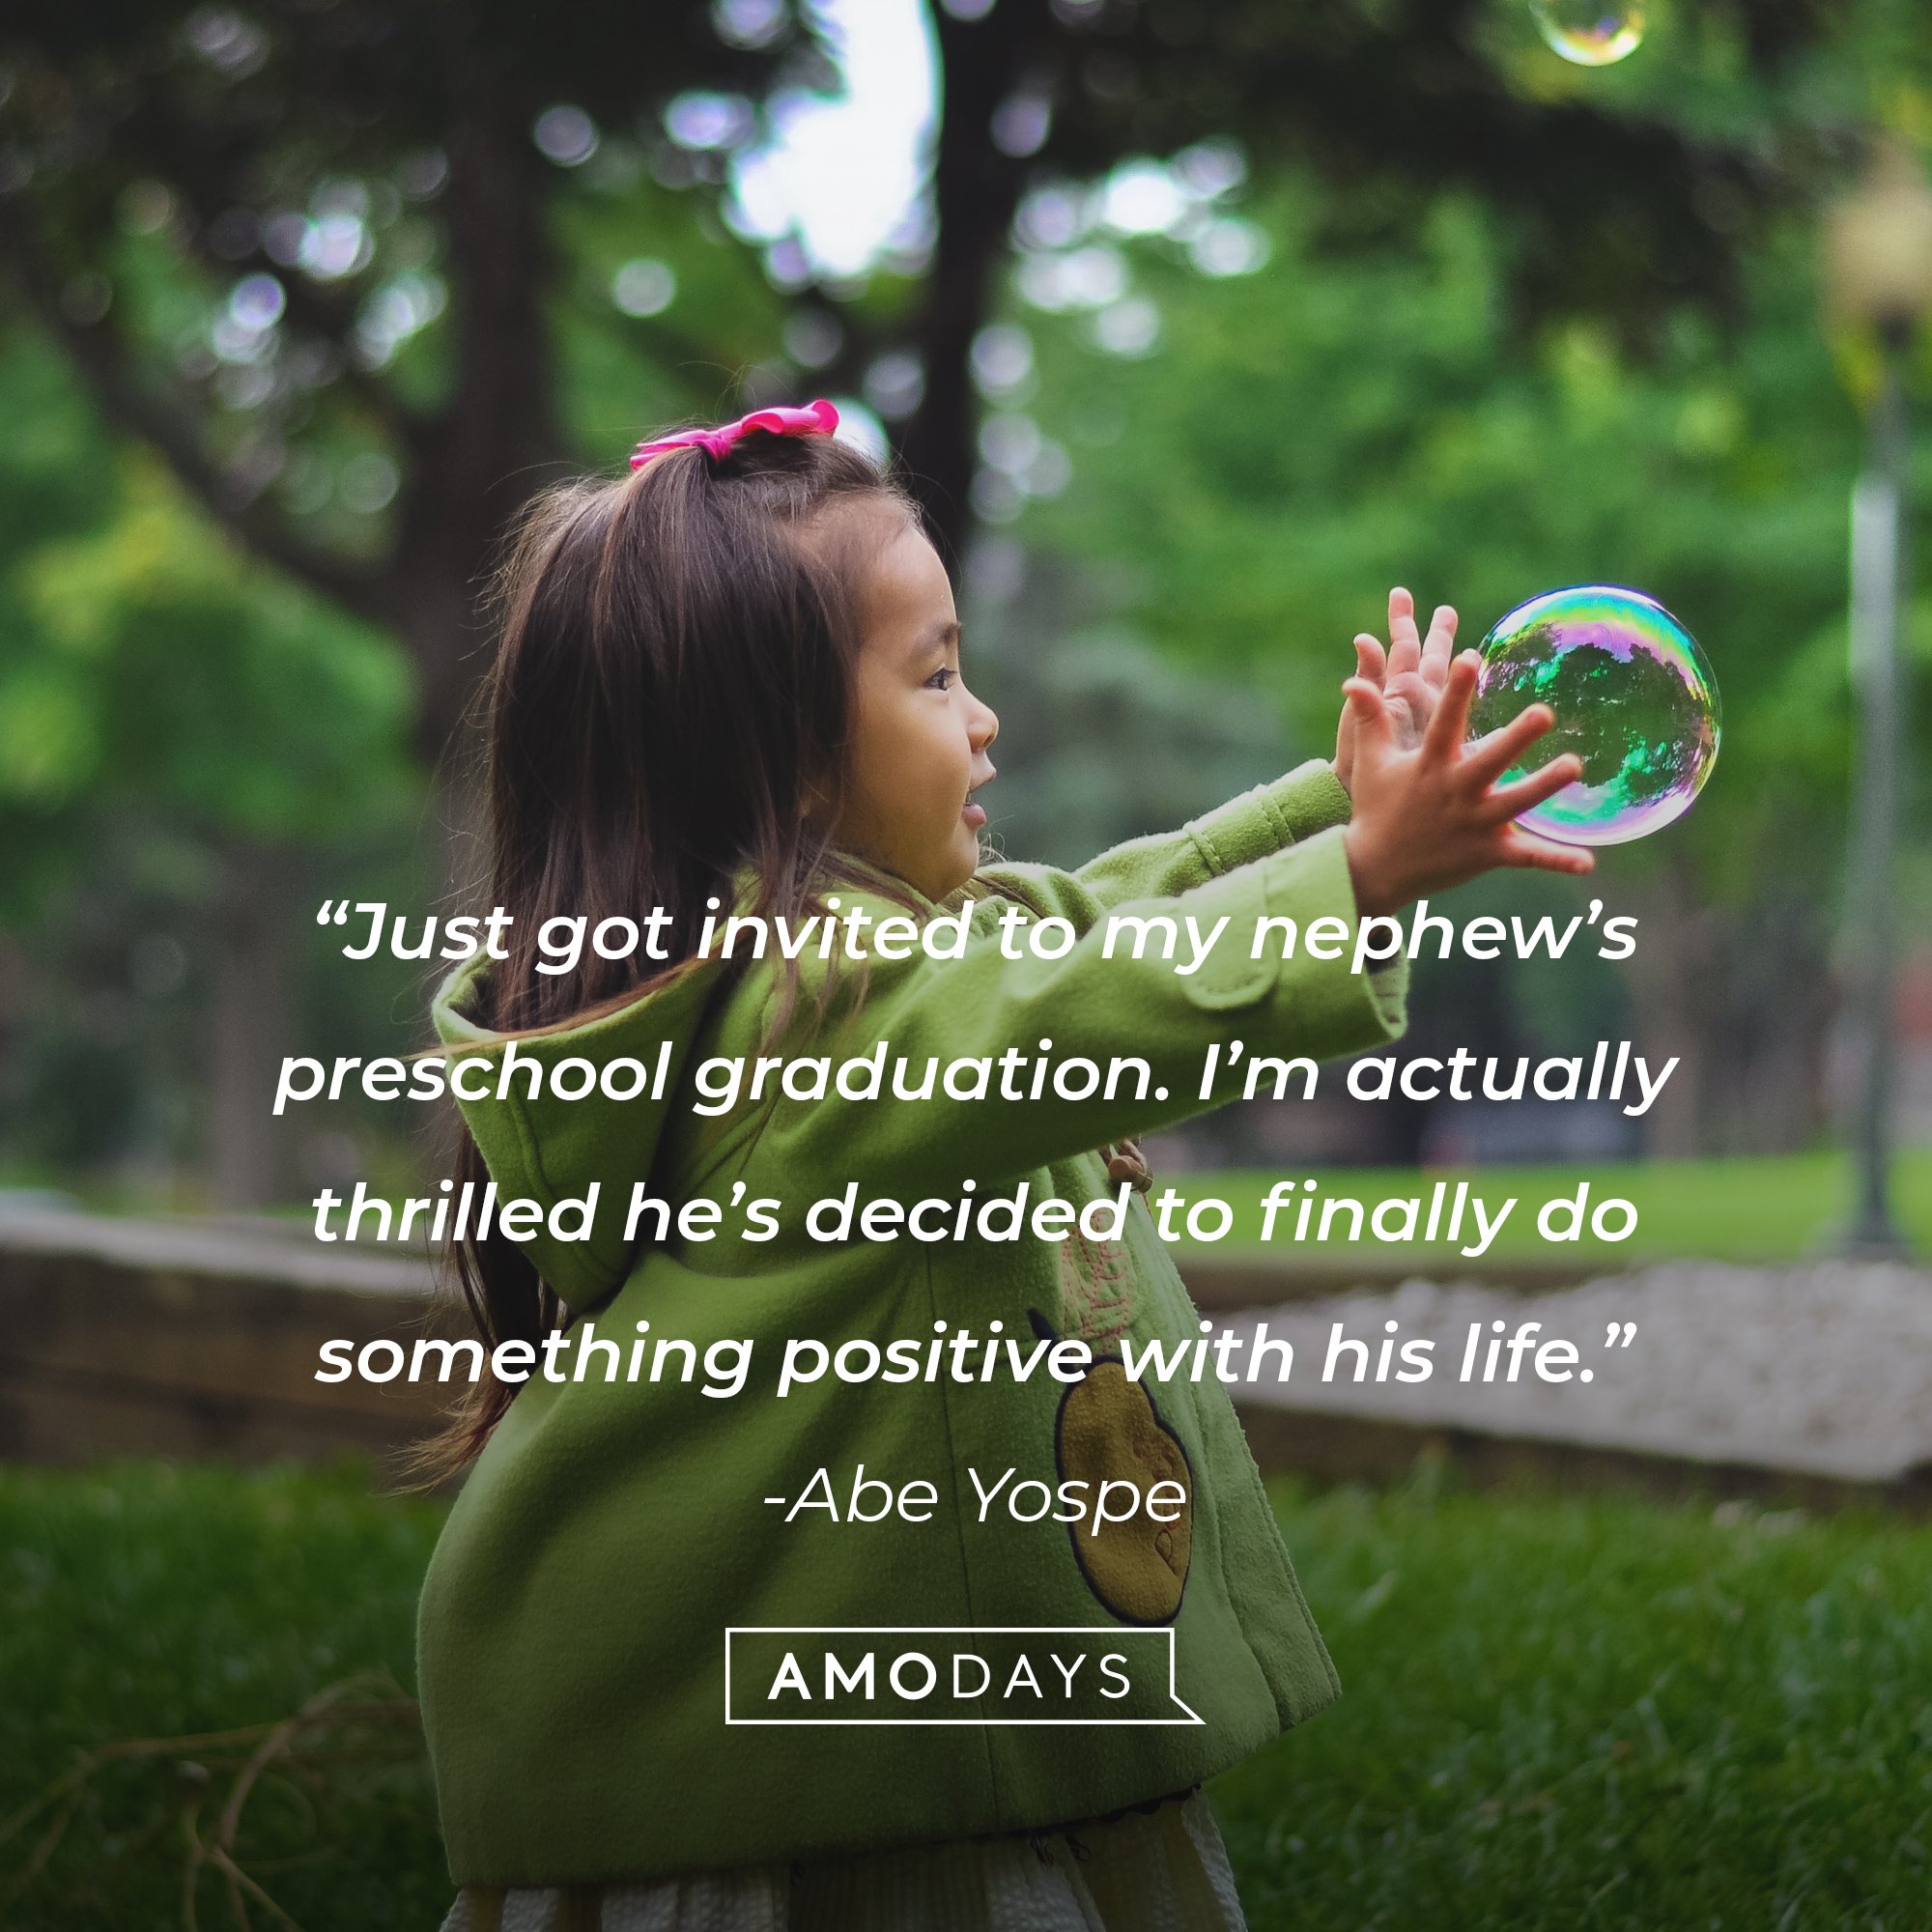 Abe Yospe's quote: “Just got invited to my nephew’s preschool graduation. I’m actually thrilled he’s decided to finally do something positive with his life.” | Image: AmoDays